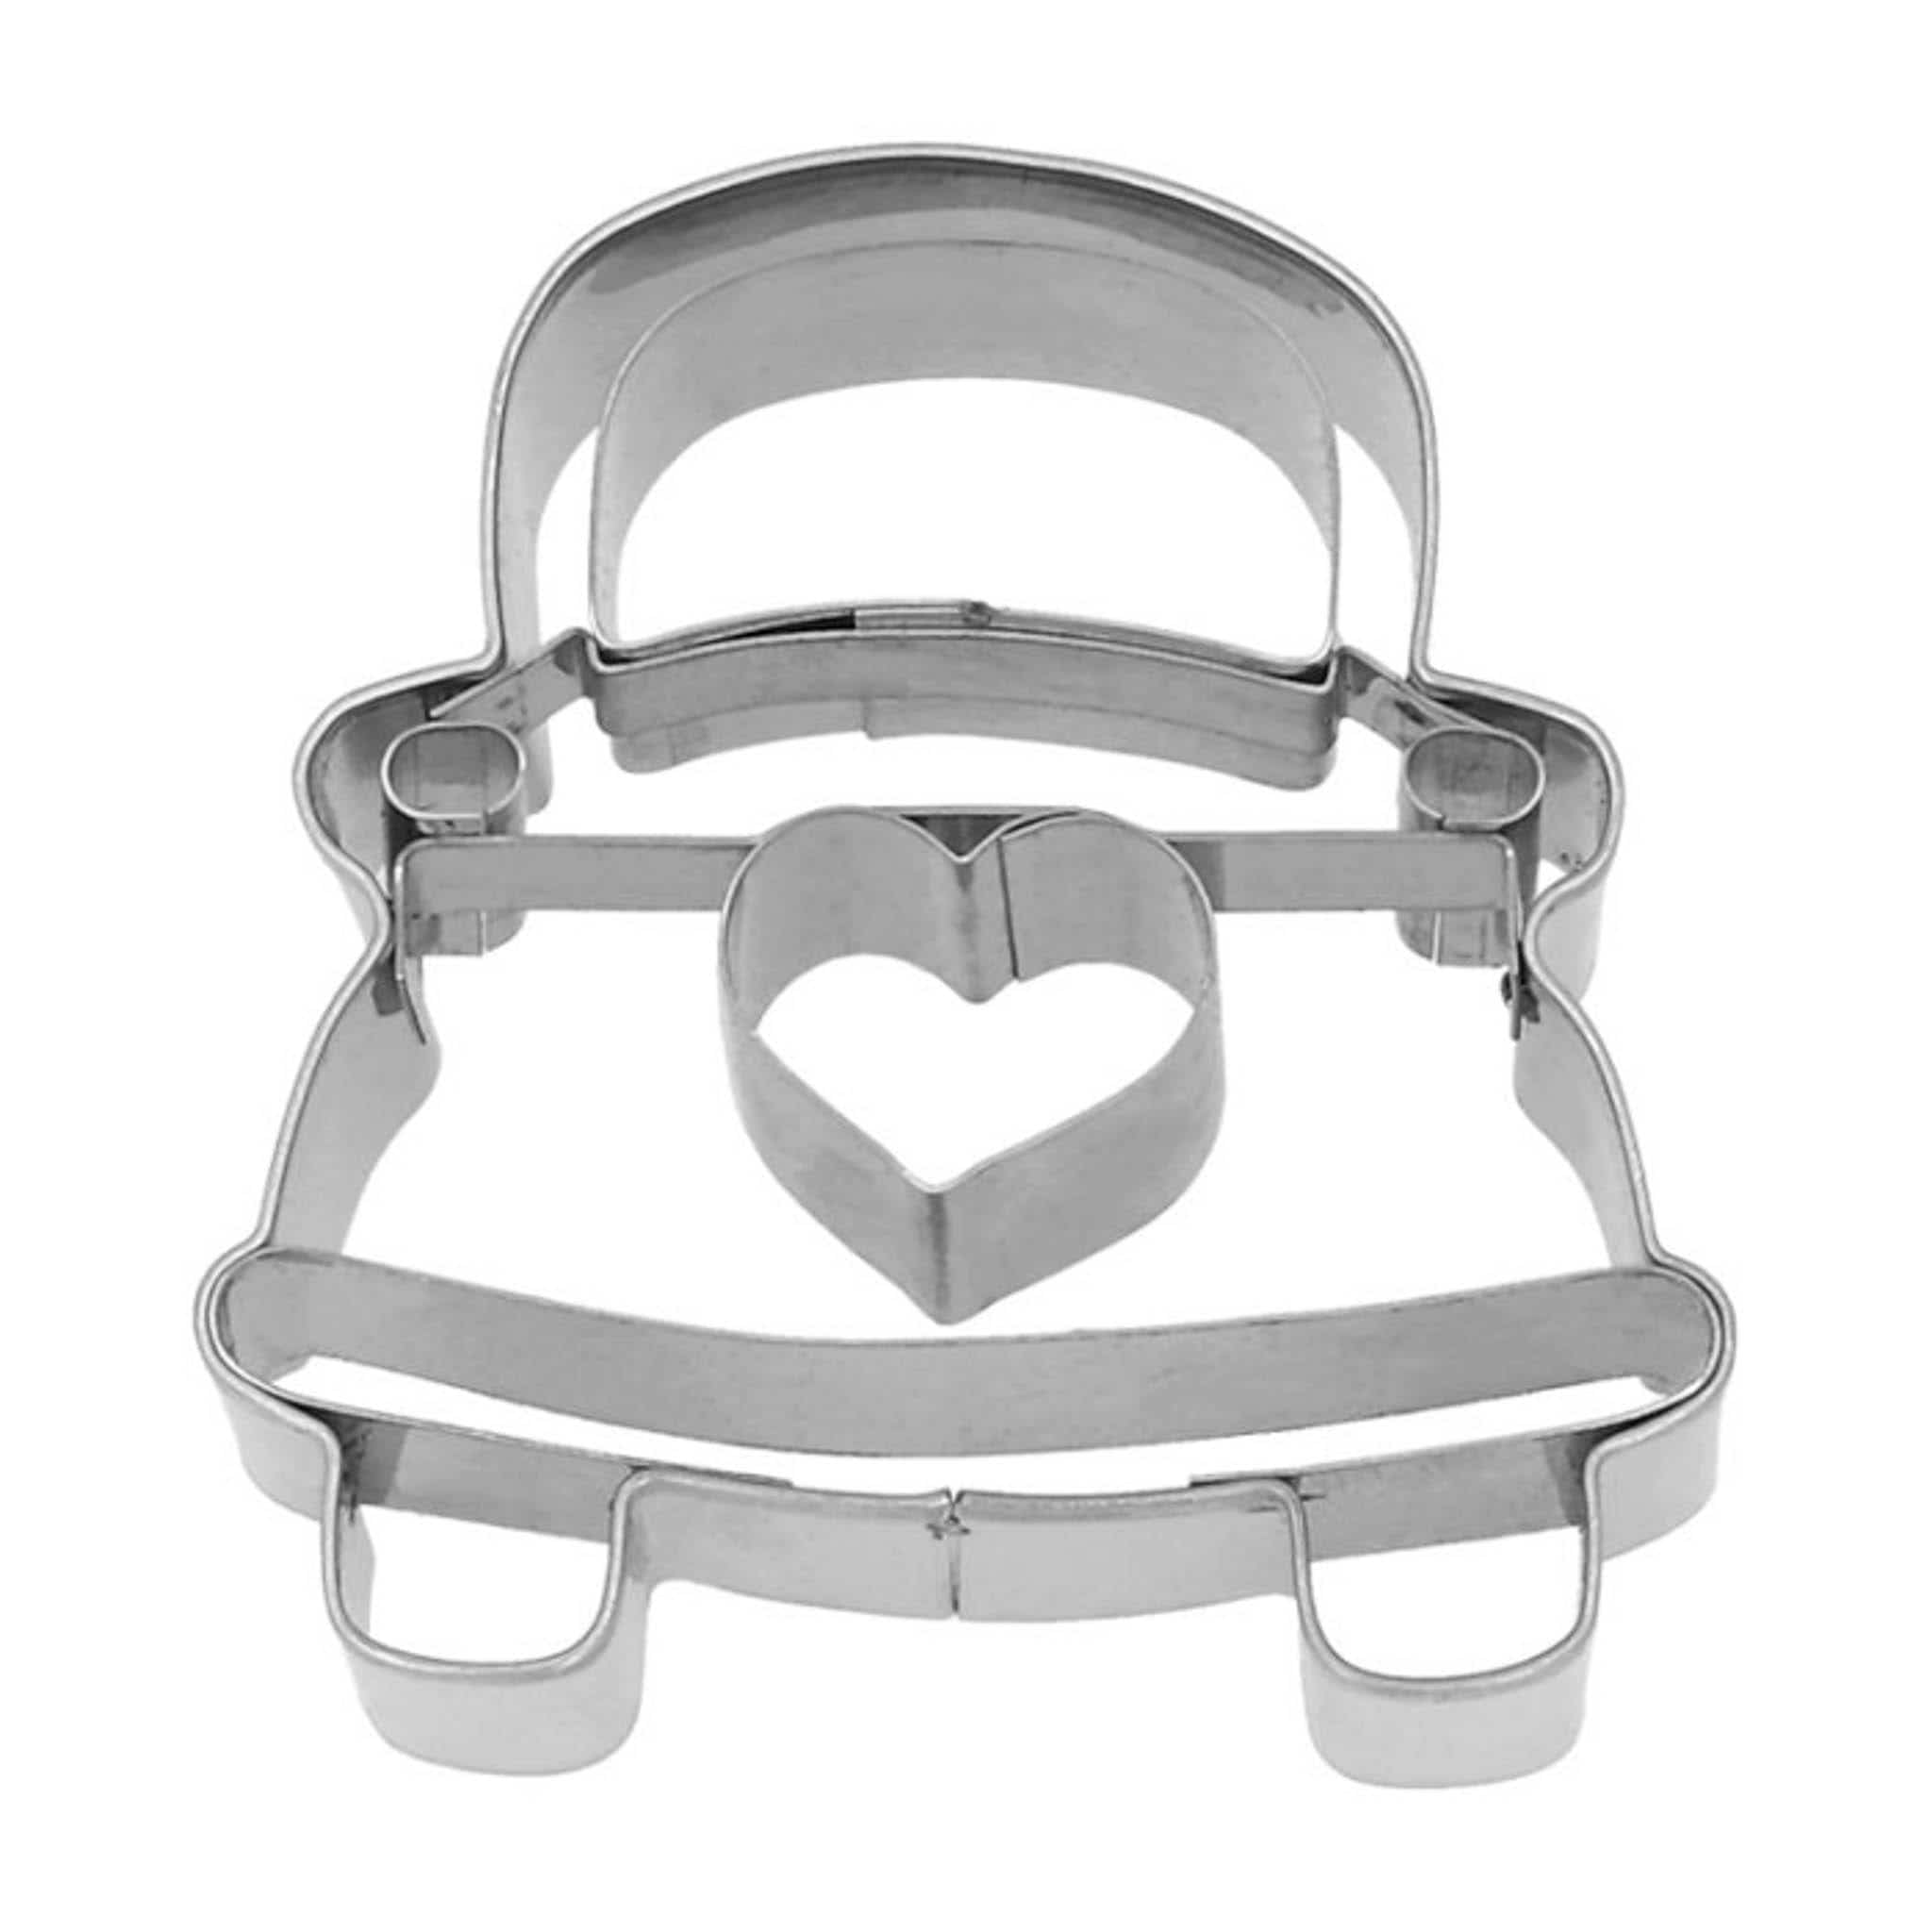 Stainless Steel Wedding Car Cookie Cutter, 6cm